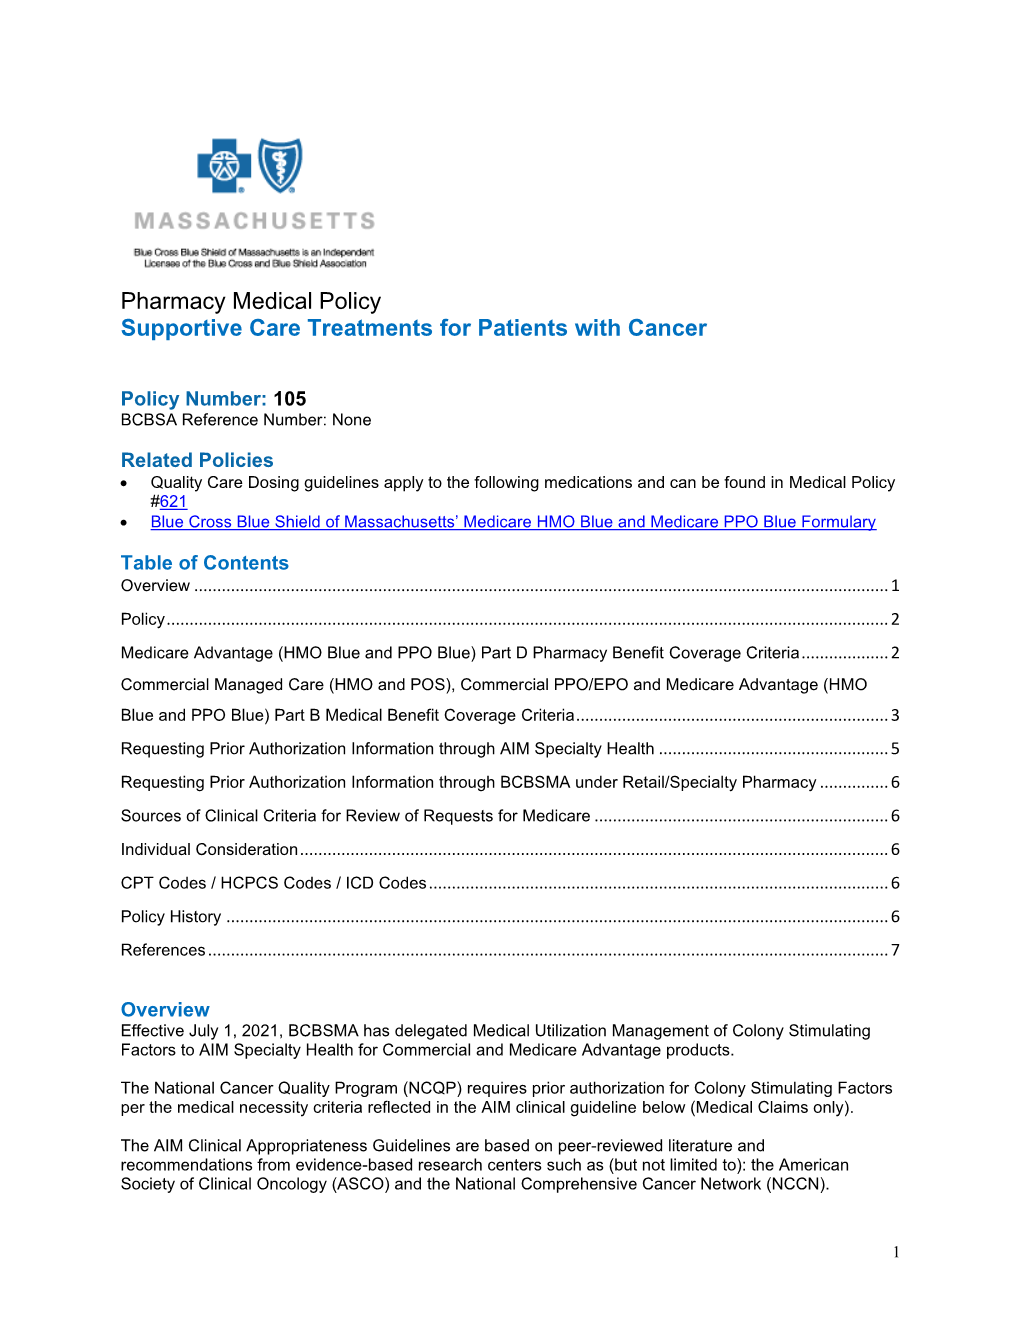 Medical Policy #105, Supportive Care Treatments for Patients with Cancer